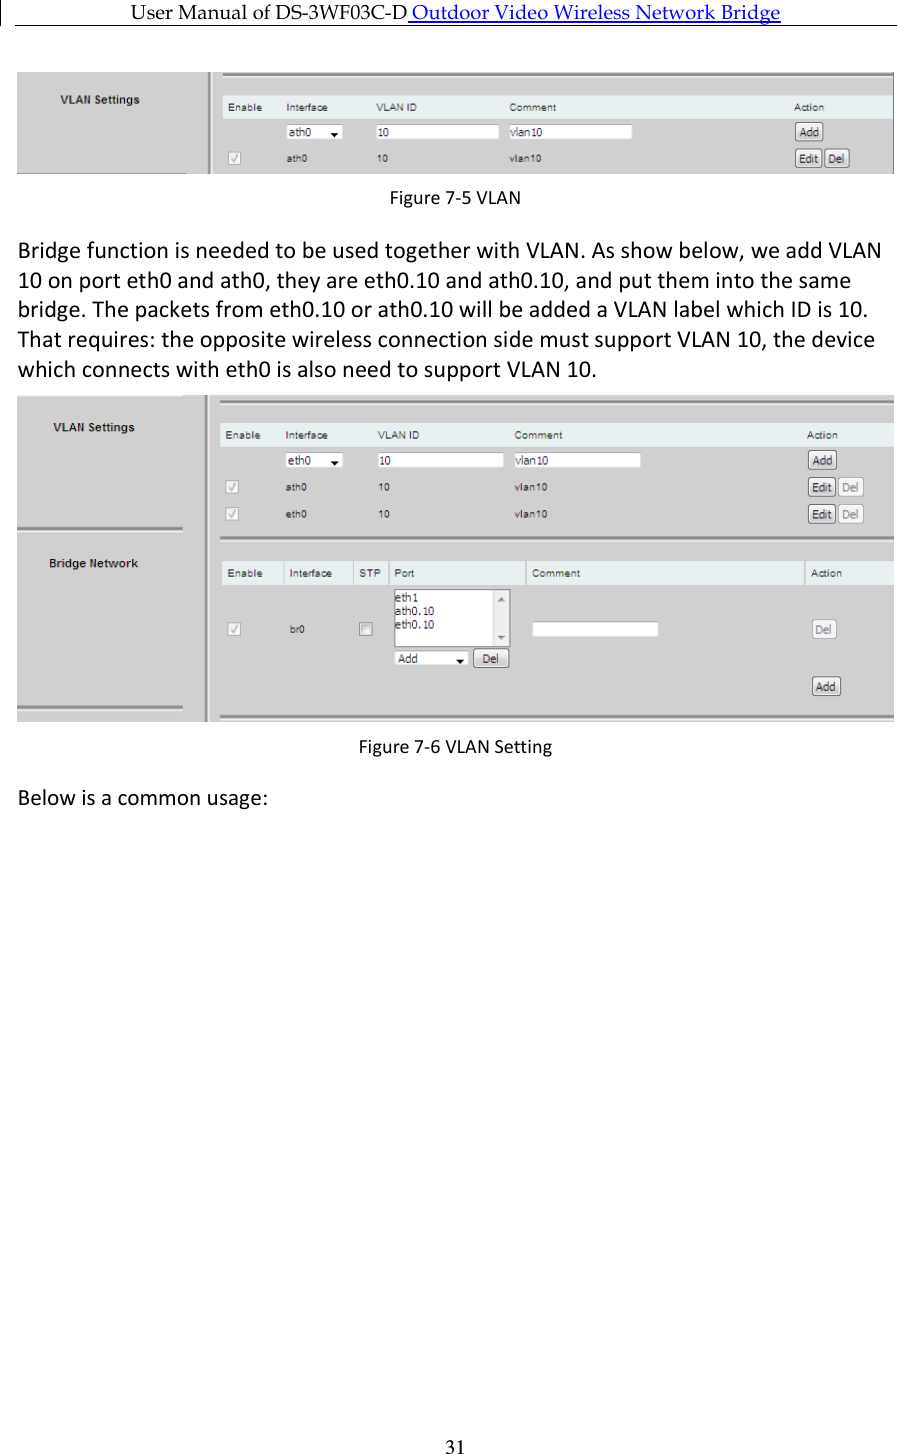 User Manual of DS-3WF03C-D Outdoor Video Wireless Network Bridge      31 Figure 7-5 VLAN Bridge function is needed to be used together with VLAN. As show below, we add VLAN 10 on port eth0 and ath0, they are eth0.10 and ath0.10, and put them into the same bridge. The packets from eth0.10 or ath0.10 will be added a VLAN label which ID is 10. That requires: the opposite wireless connection side must support VLAN 10, the device which connects with eth0 is also need to support VLAN 10.   Figure 7-6 VLAN Setting Below is a common usage: 